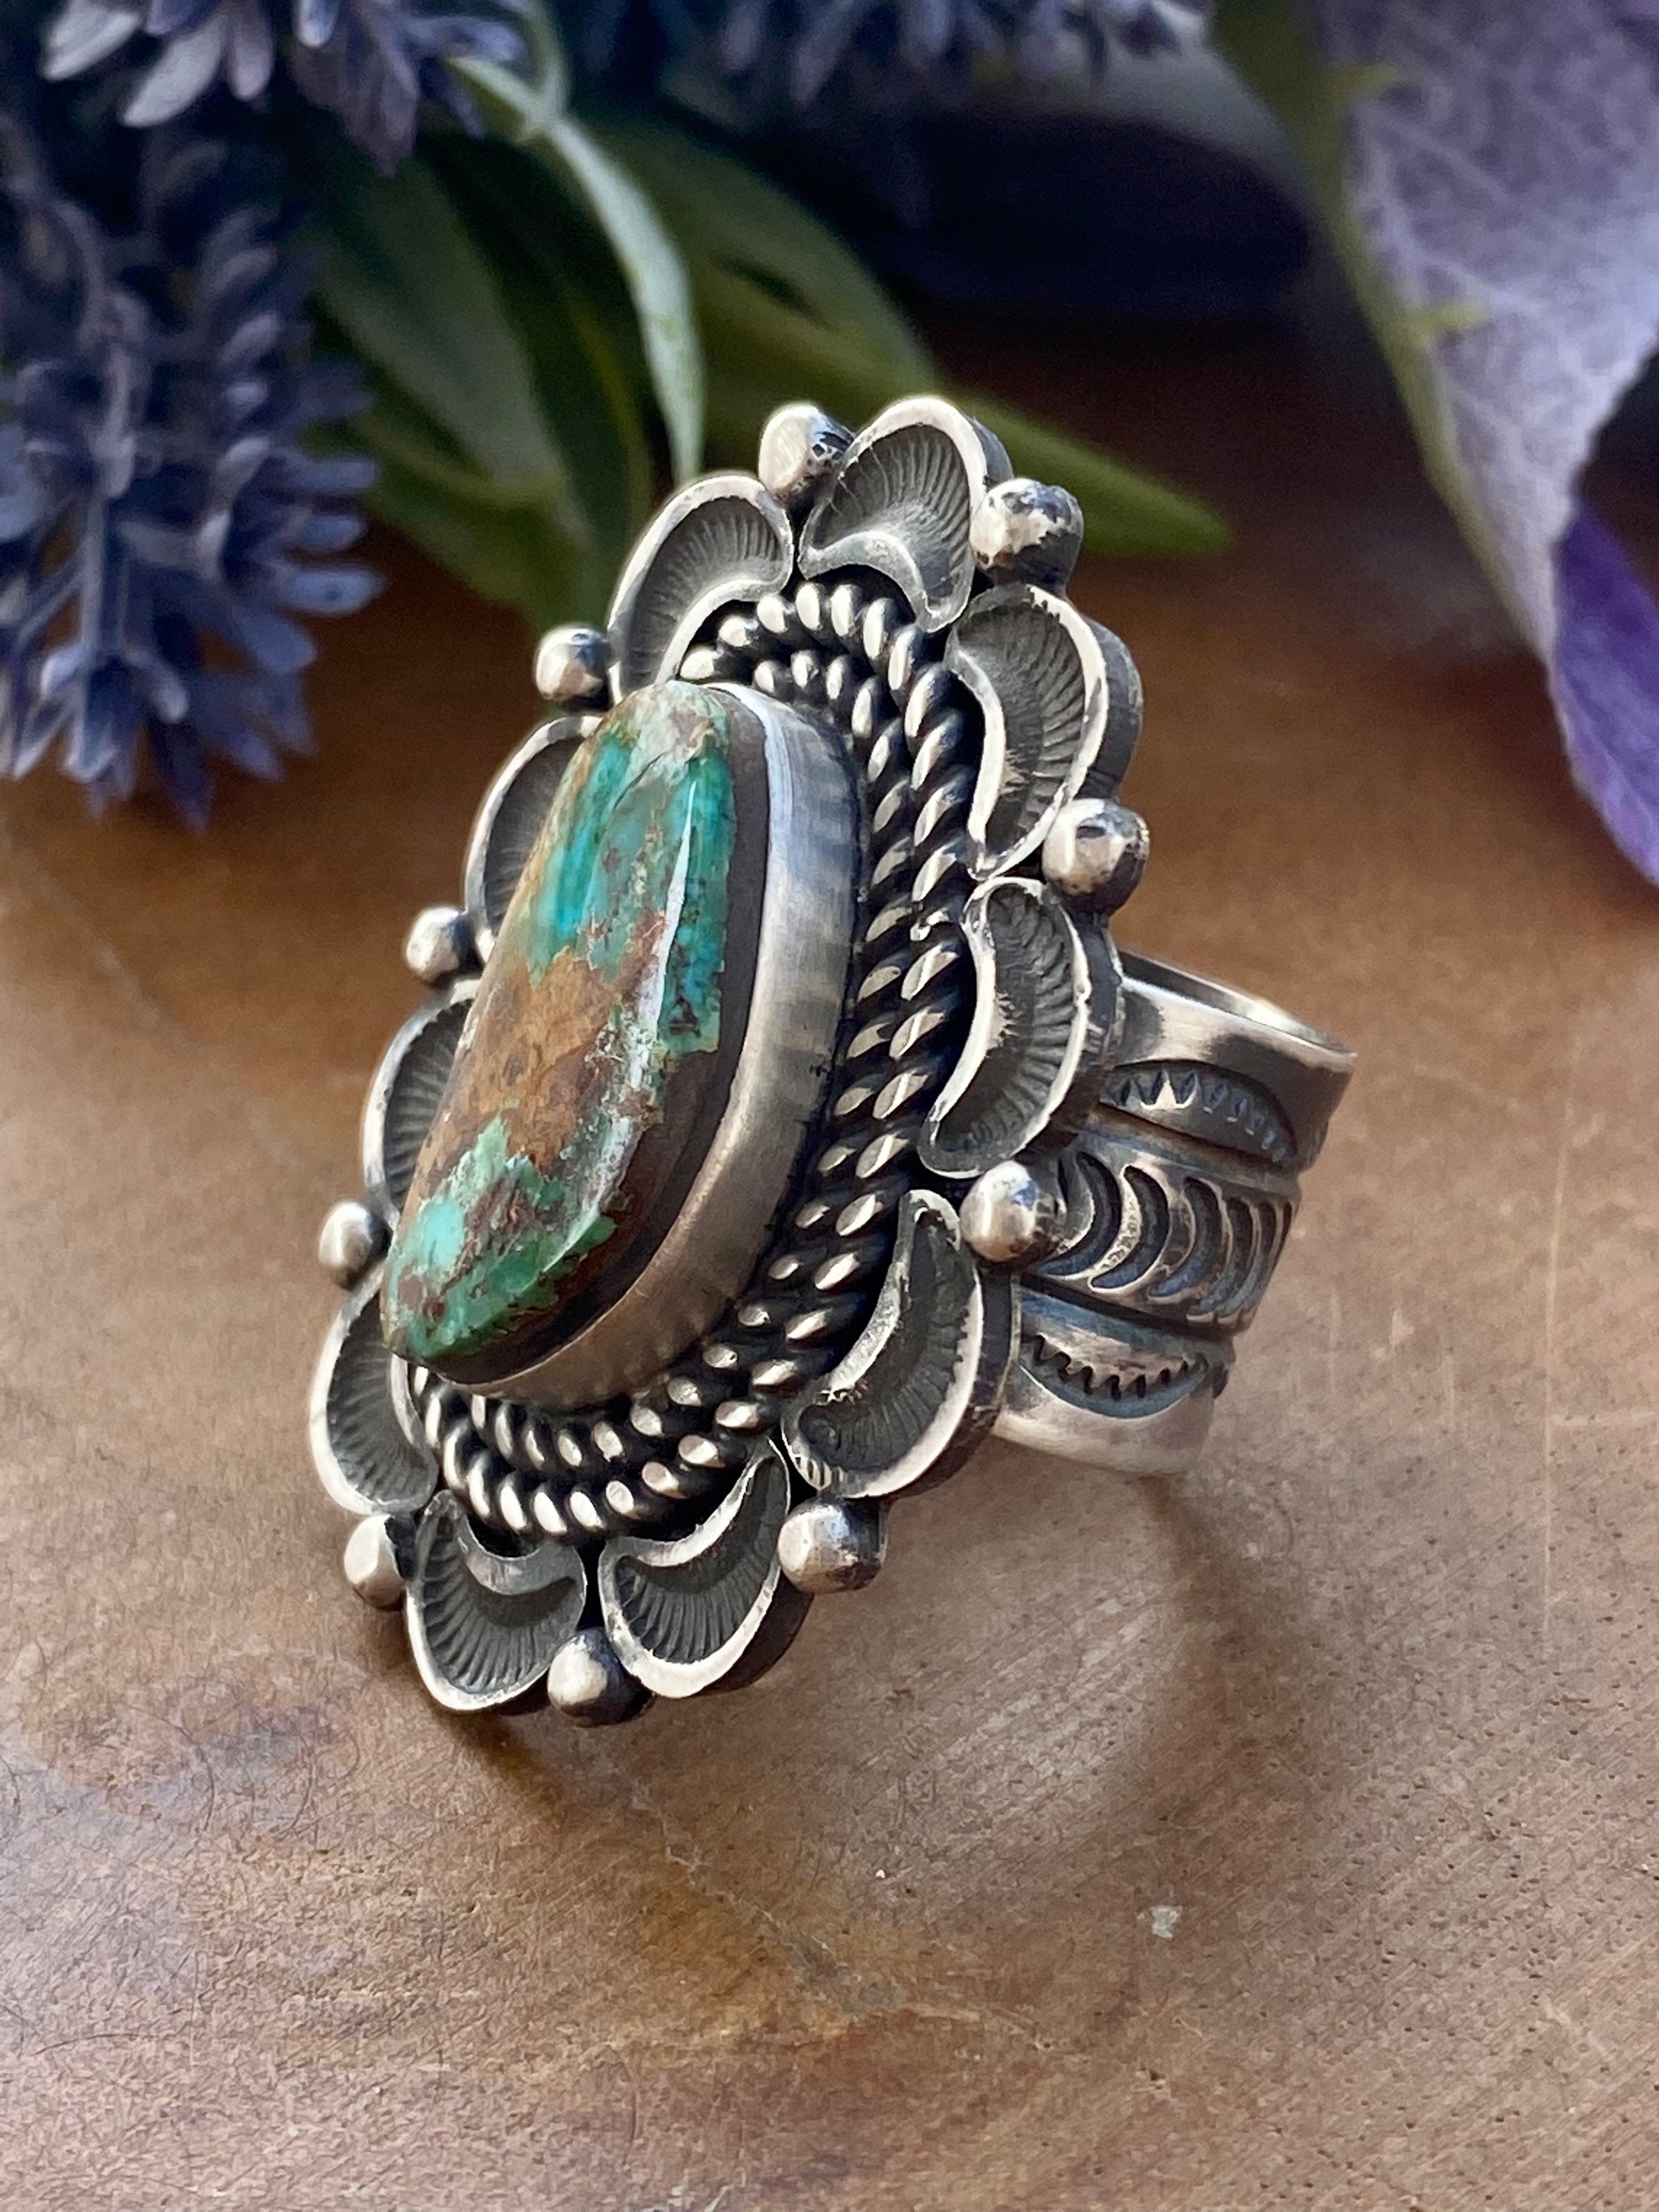 Alex Sanchez Kings Manassa Turquoise & Sterling Silver Ring Size 6.5